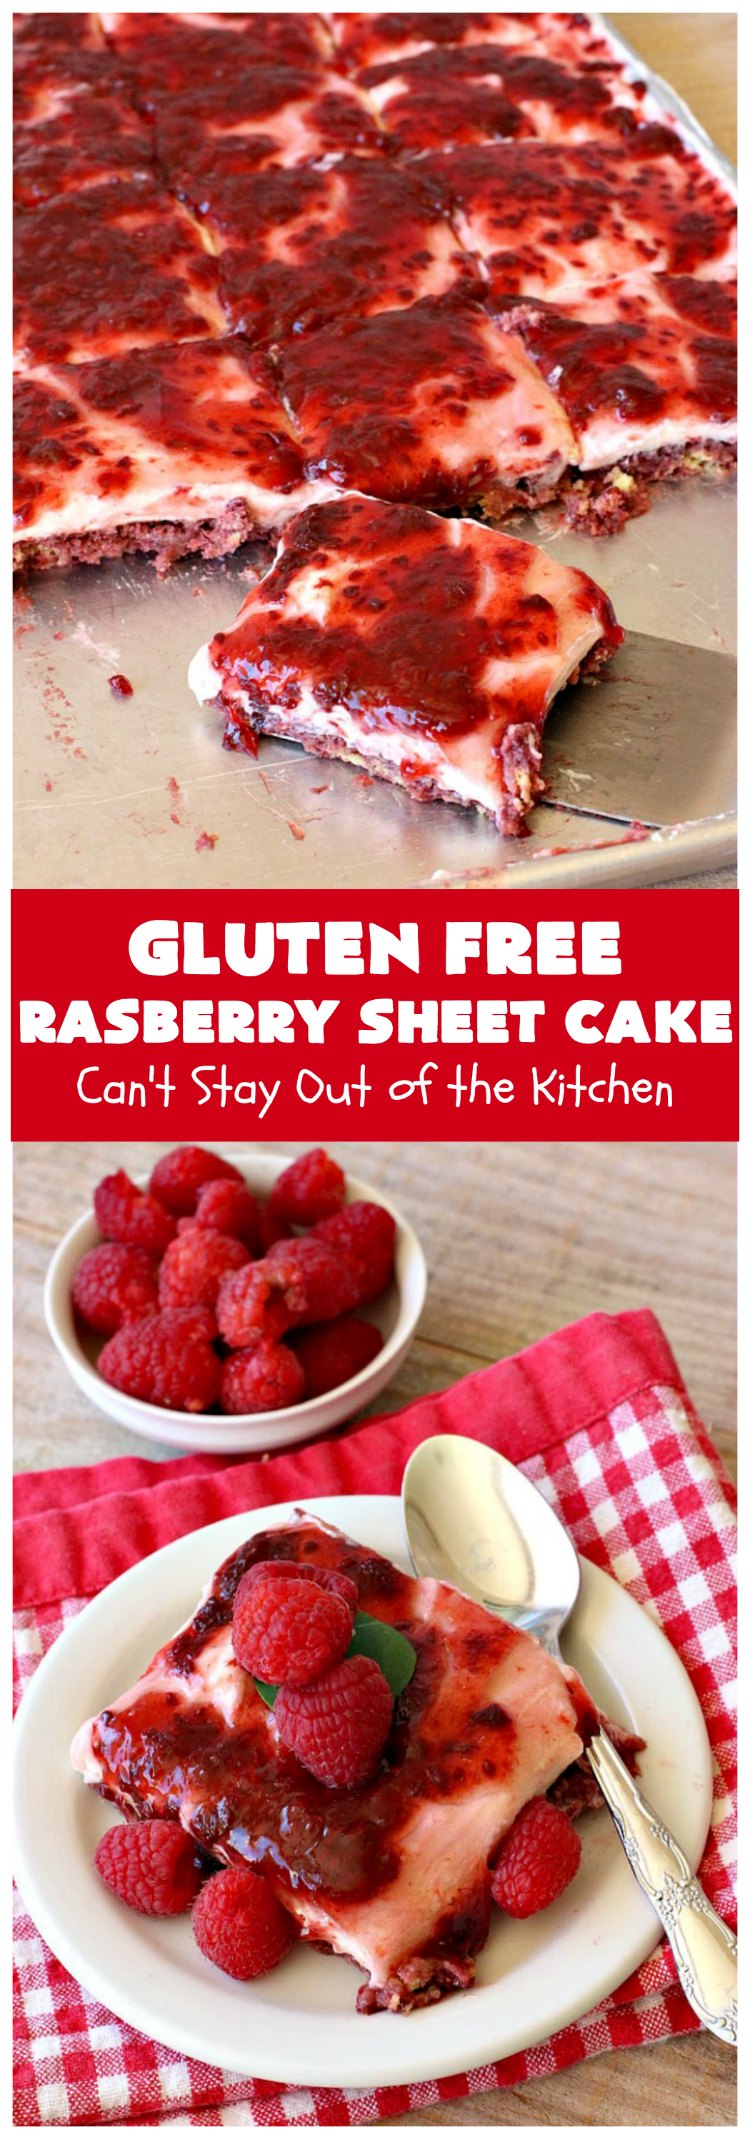 Gluten Free Raspberry Sheet Cake | Can't Stay Out of the Kitchen